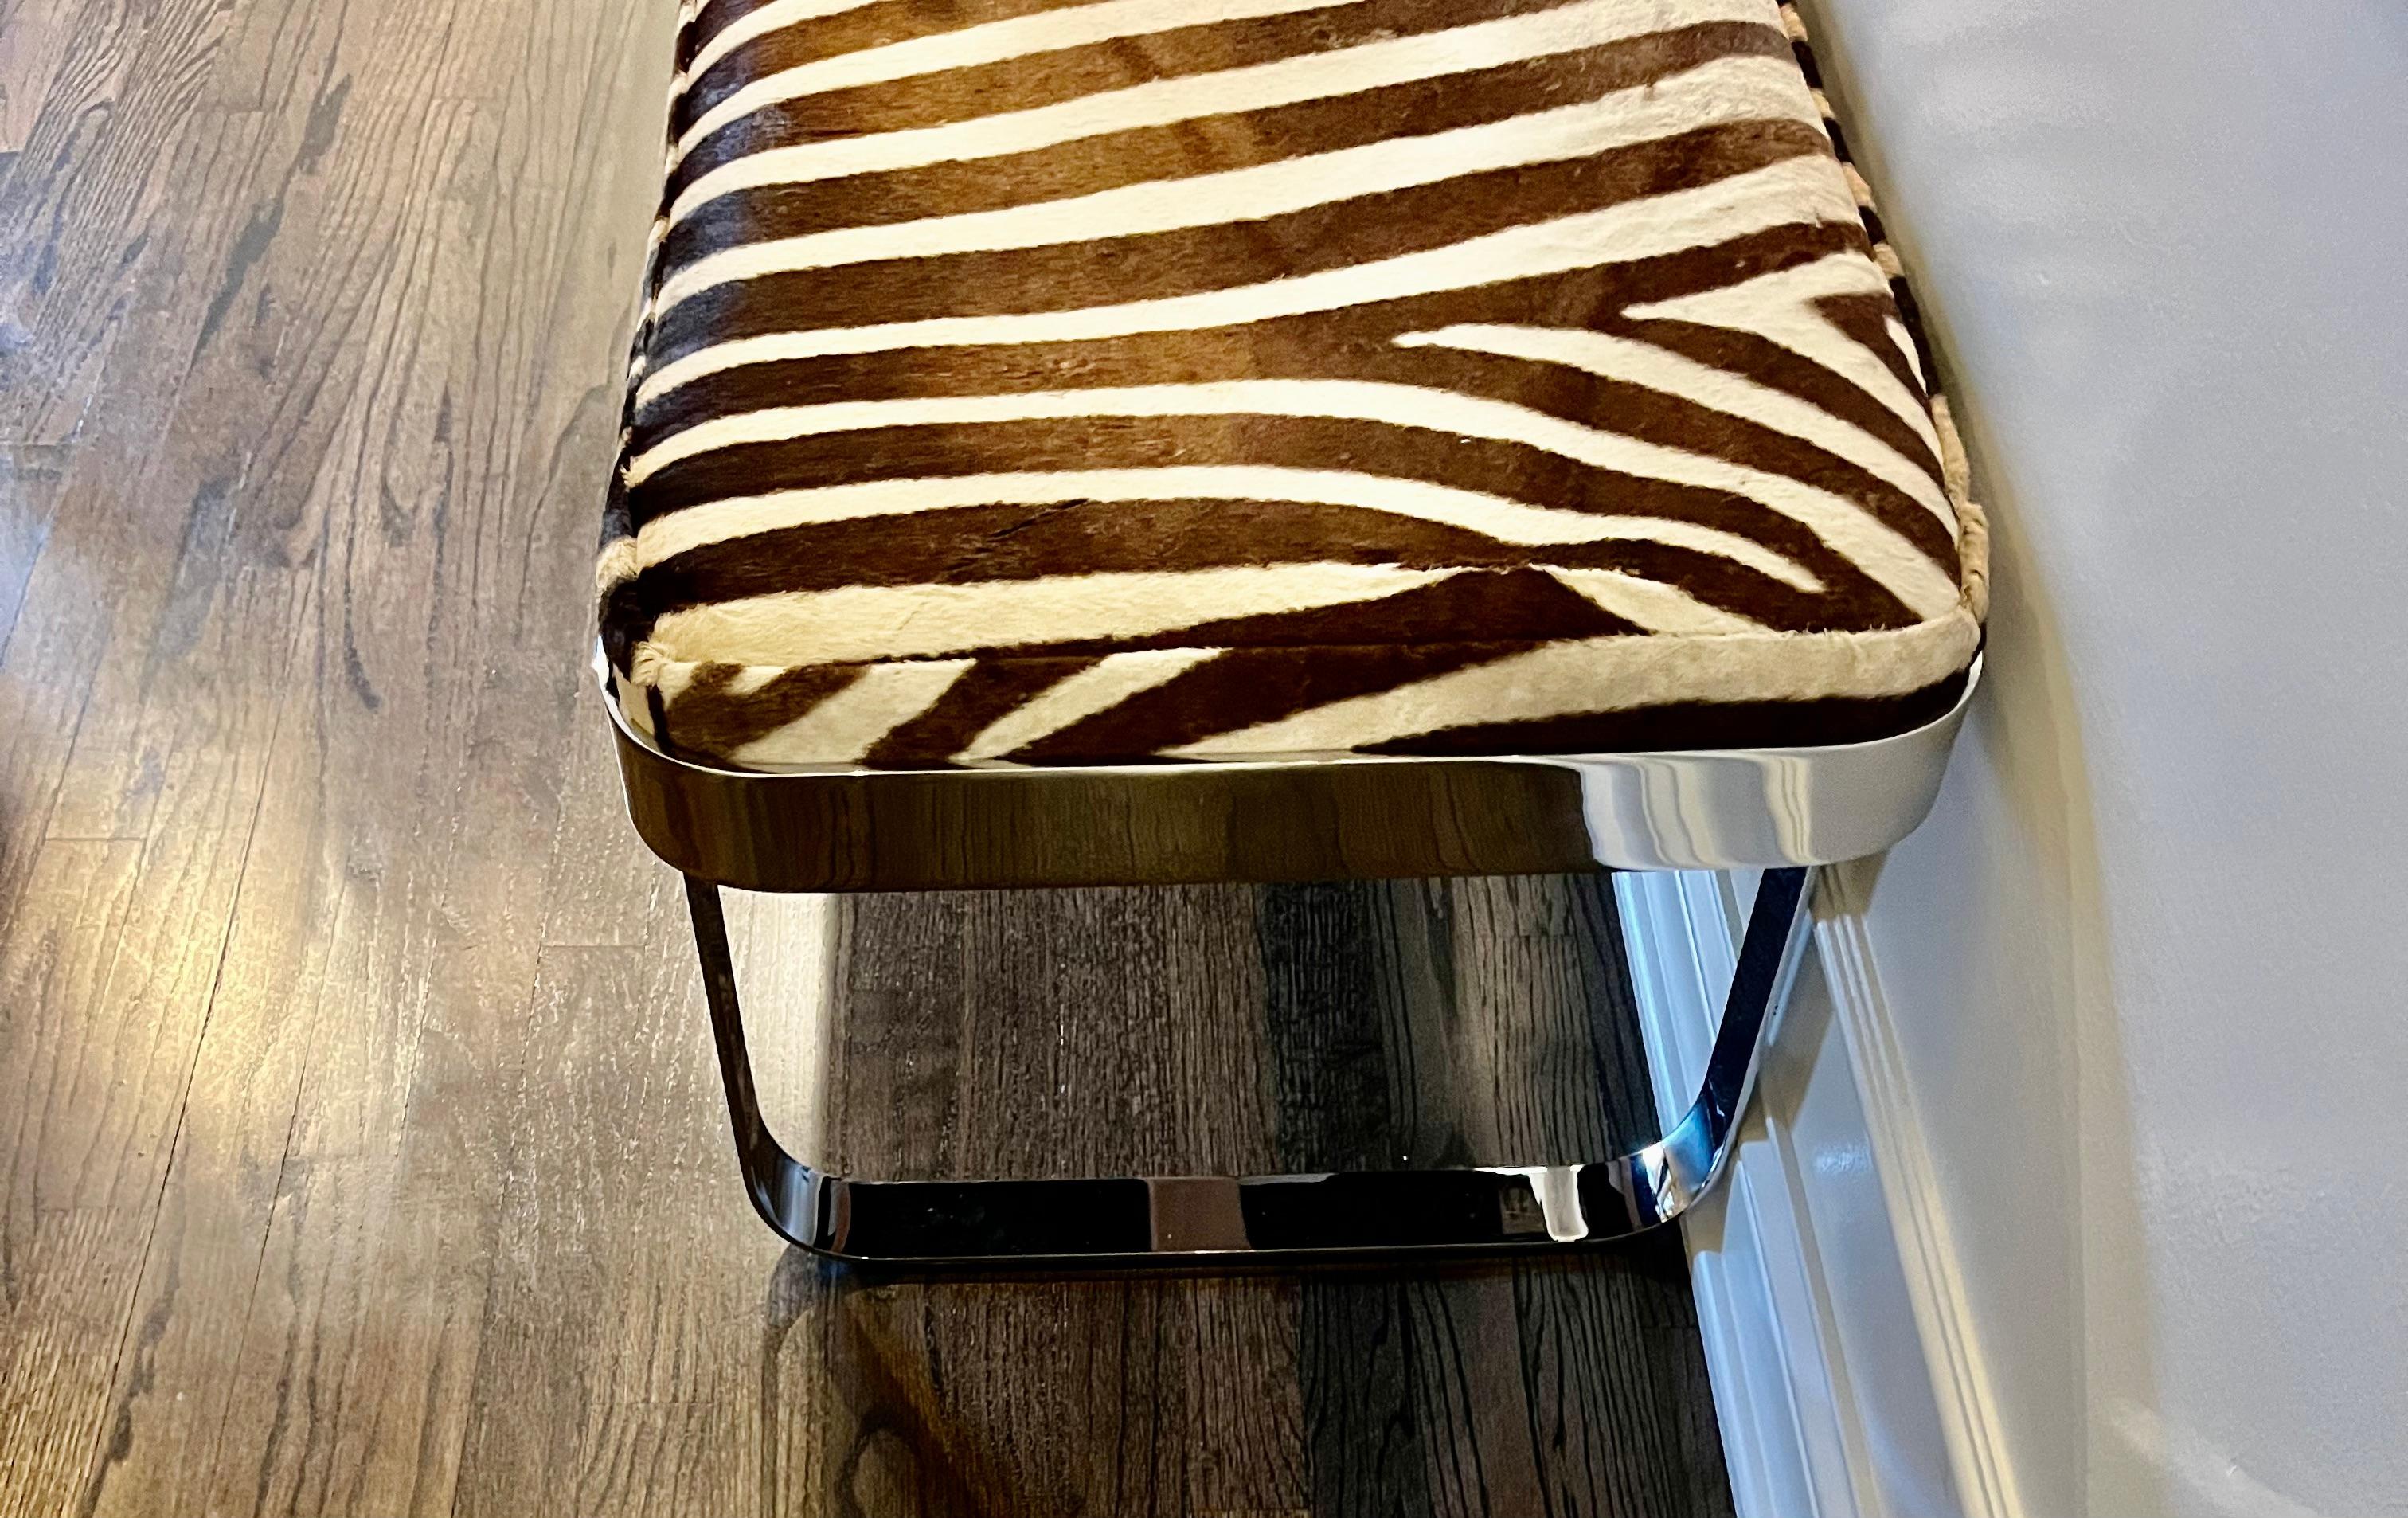 20th Century Mid-Century Modern Chrome Bench by Tri Mark Newly Upholstered in Zebra Hide